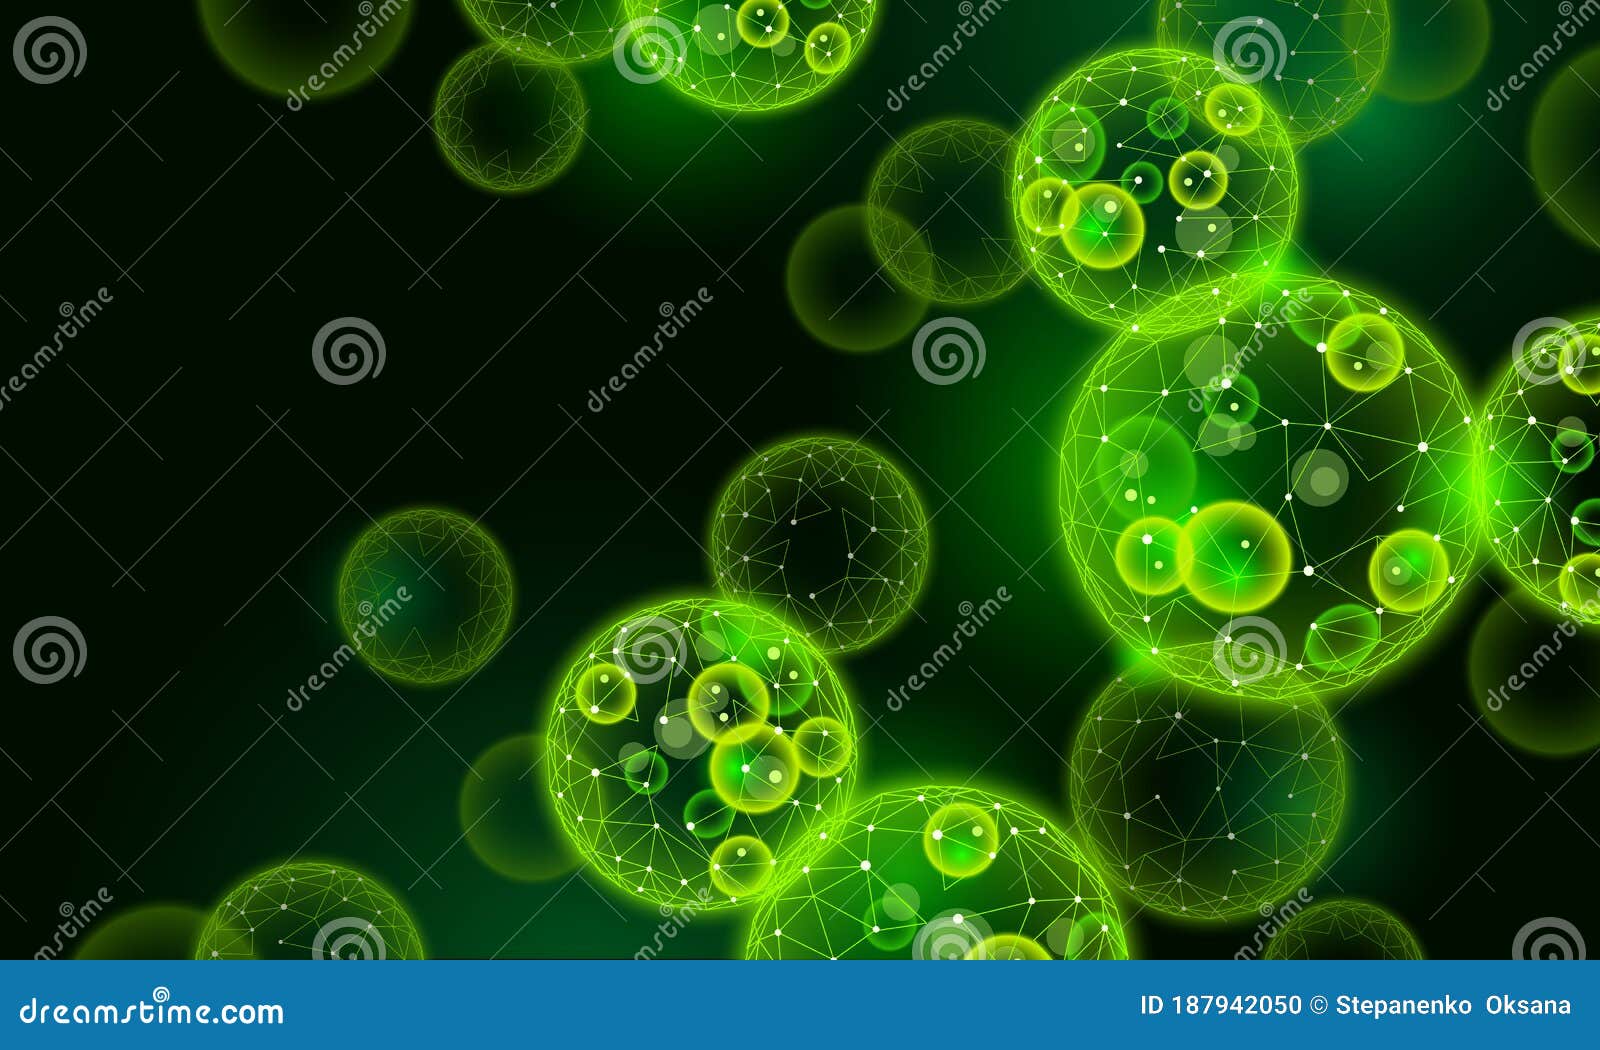 3d realistic macro chlorella cells colony. green energy biofuel food supplement. chlorophyll source healthy diet. green